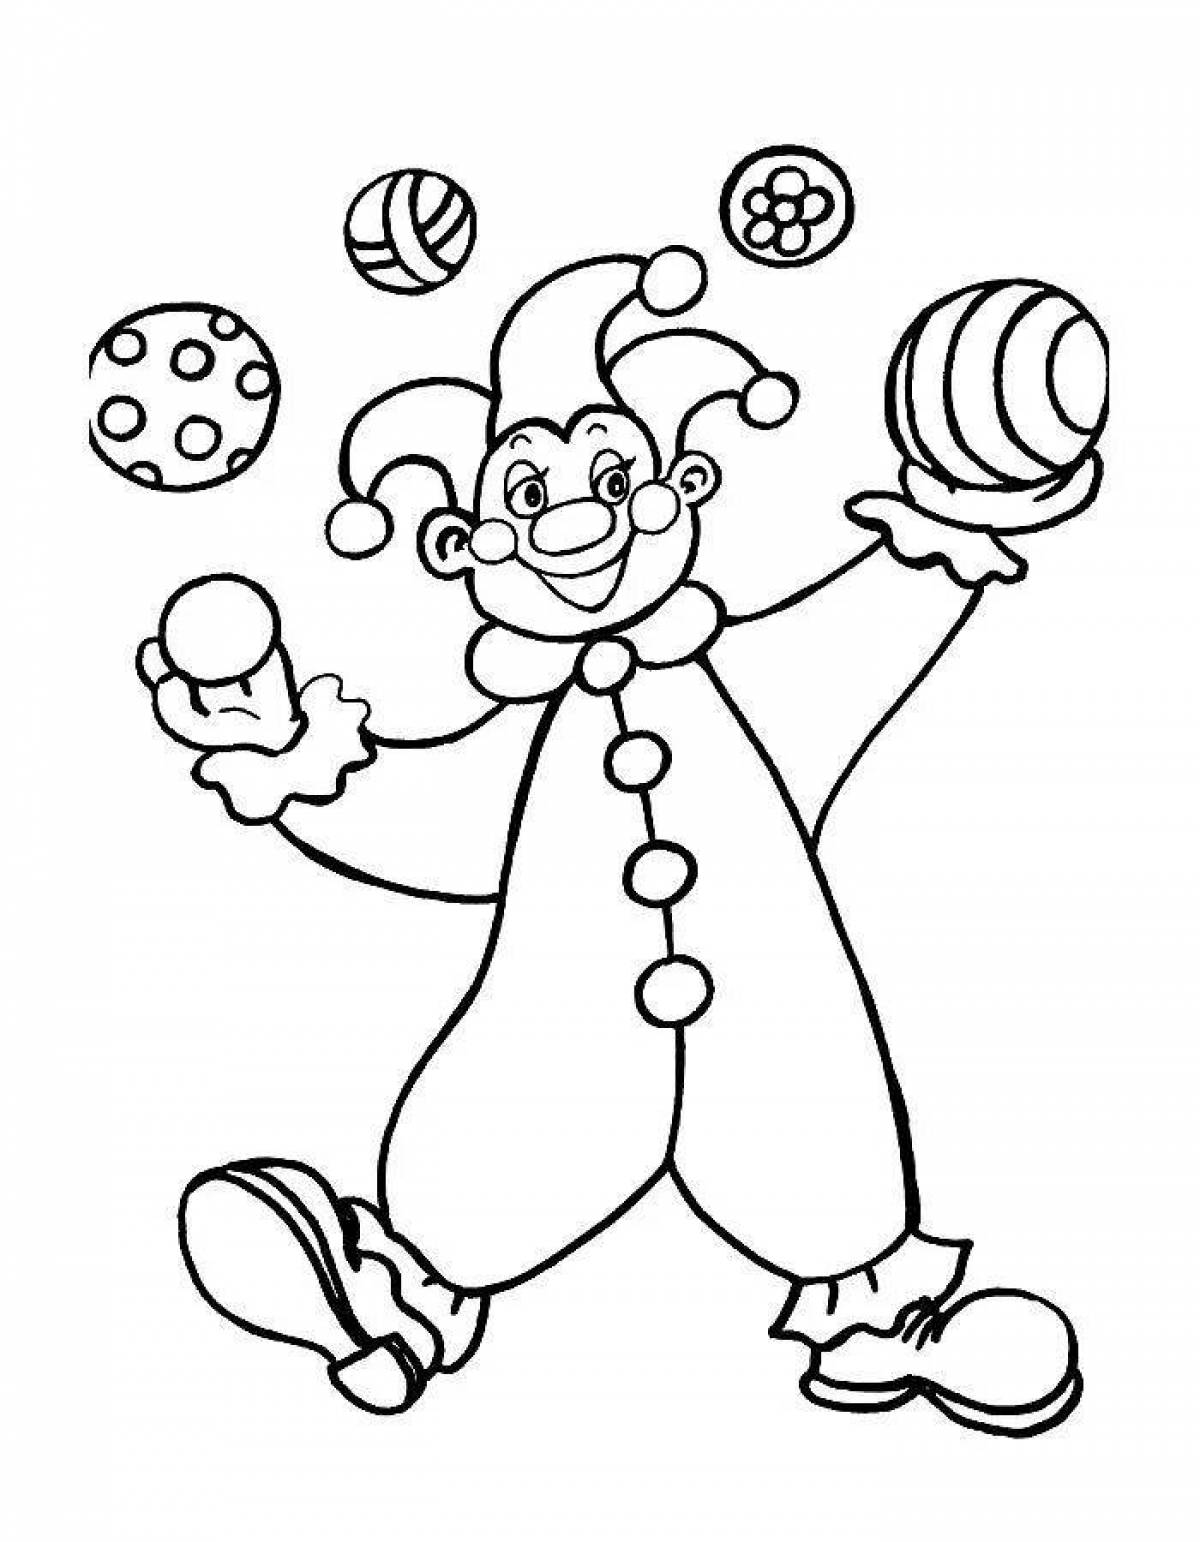 Adorable clown coloring book for kids